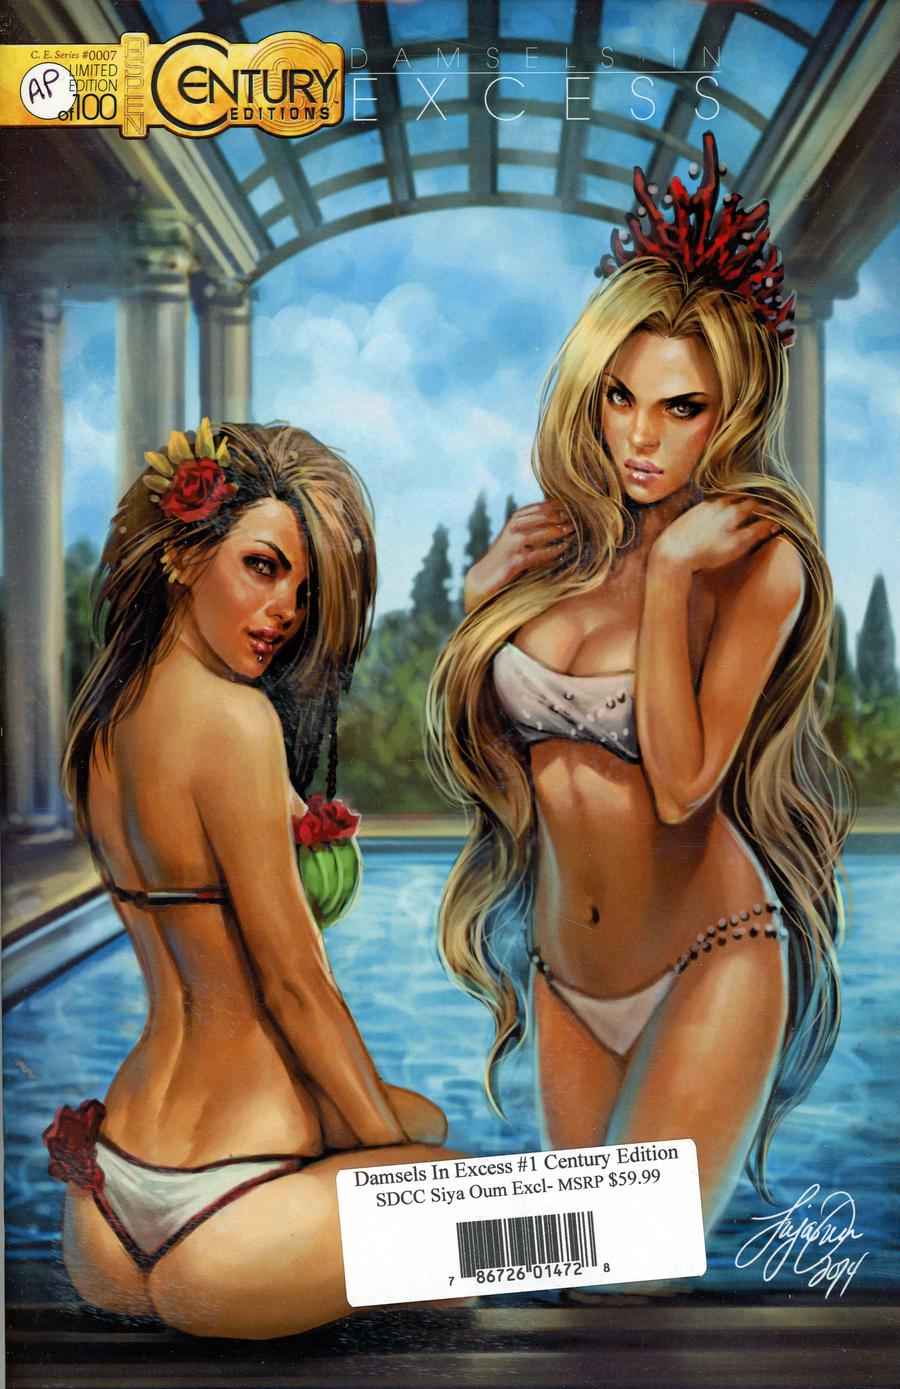 Damsels In Excess #1 Cover E Comic-Con International San Diego Century Edition Variant Cover